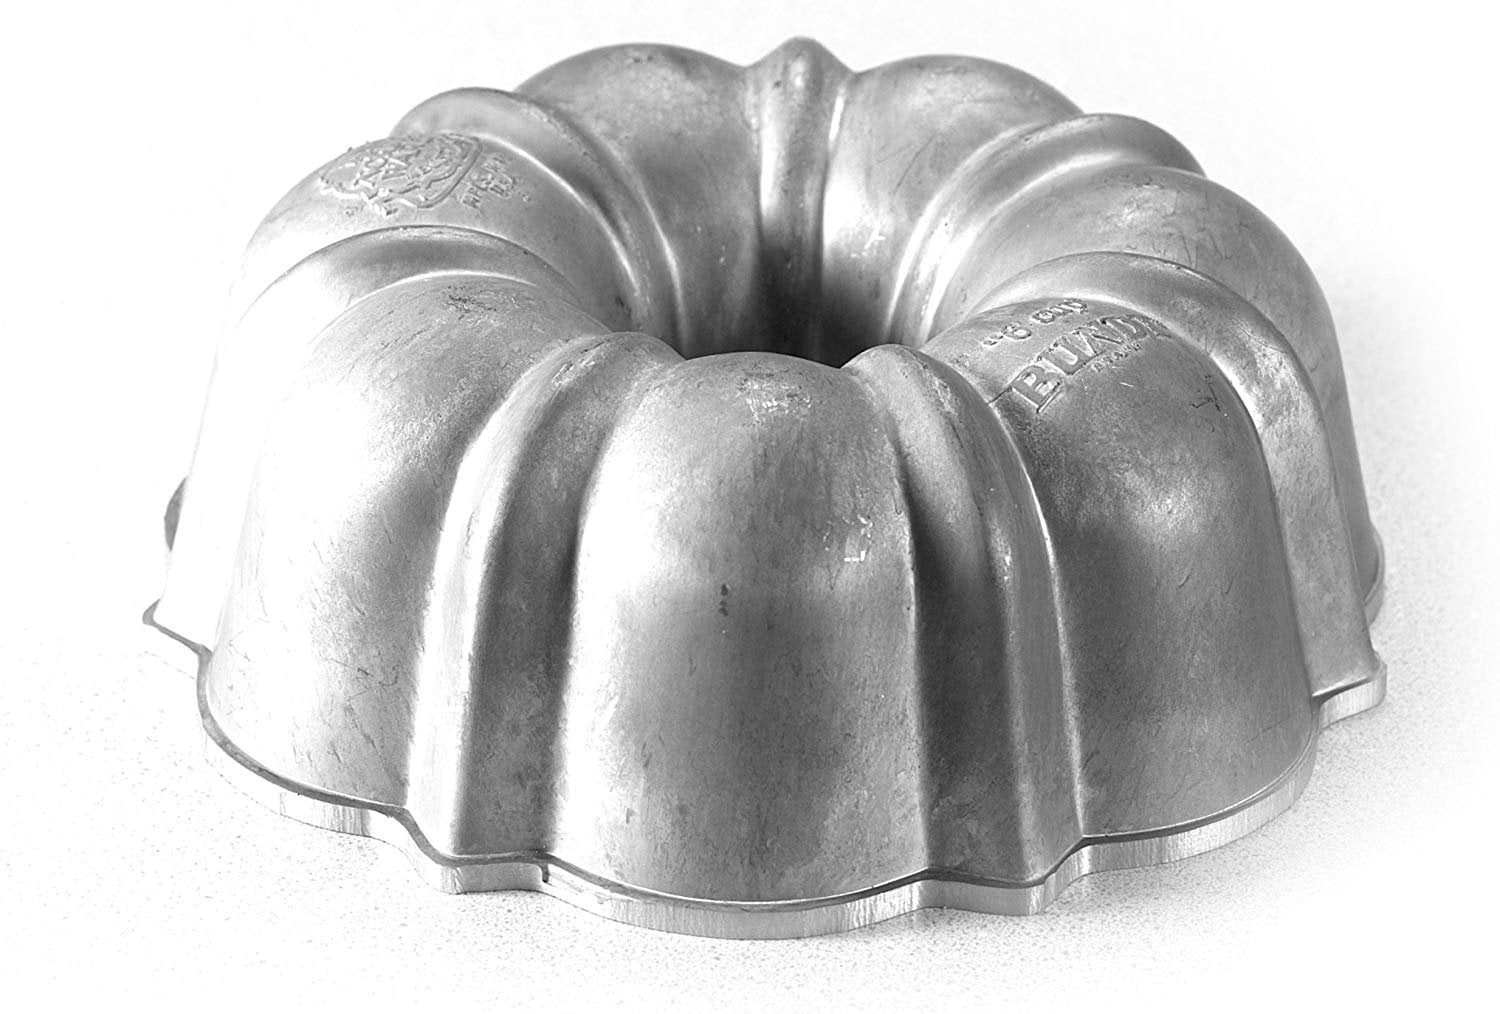 Details about   Vintage Nordic Ware The Bundt People 8 Inch Stainless Frying Pan Made in USA 